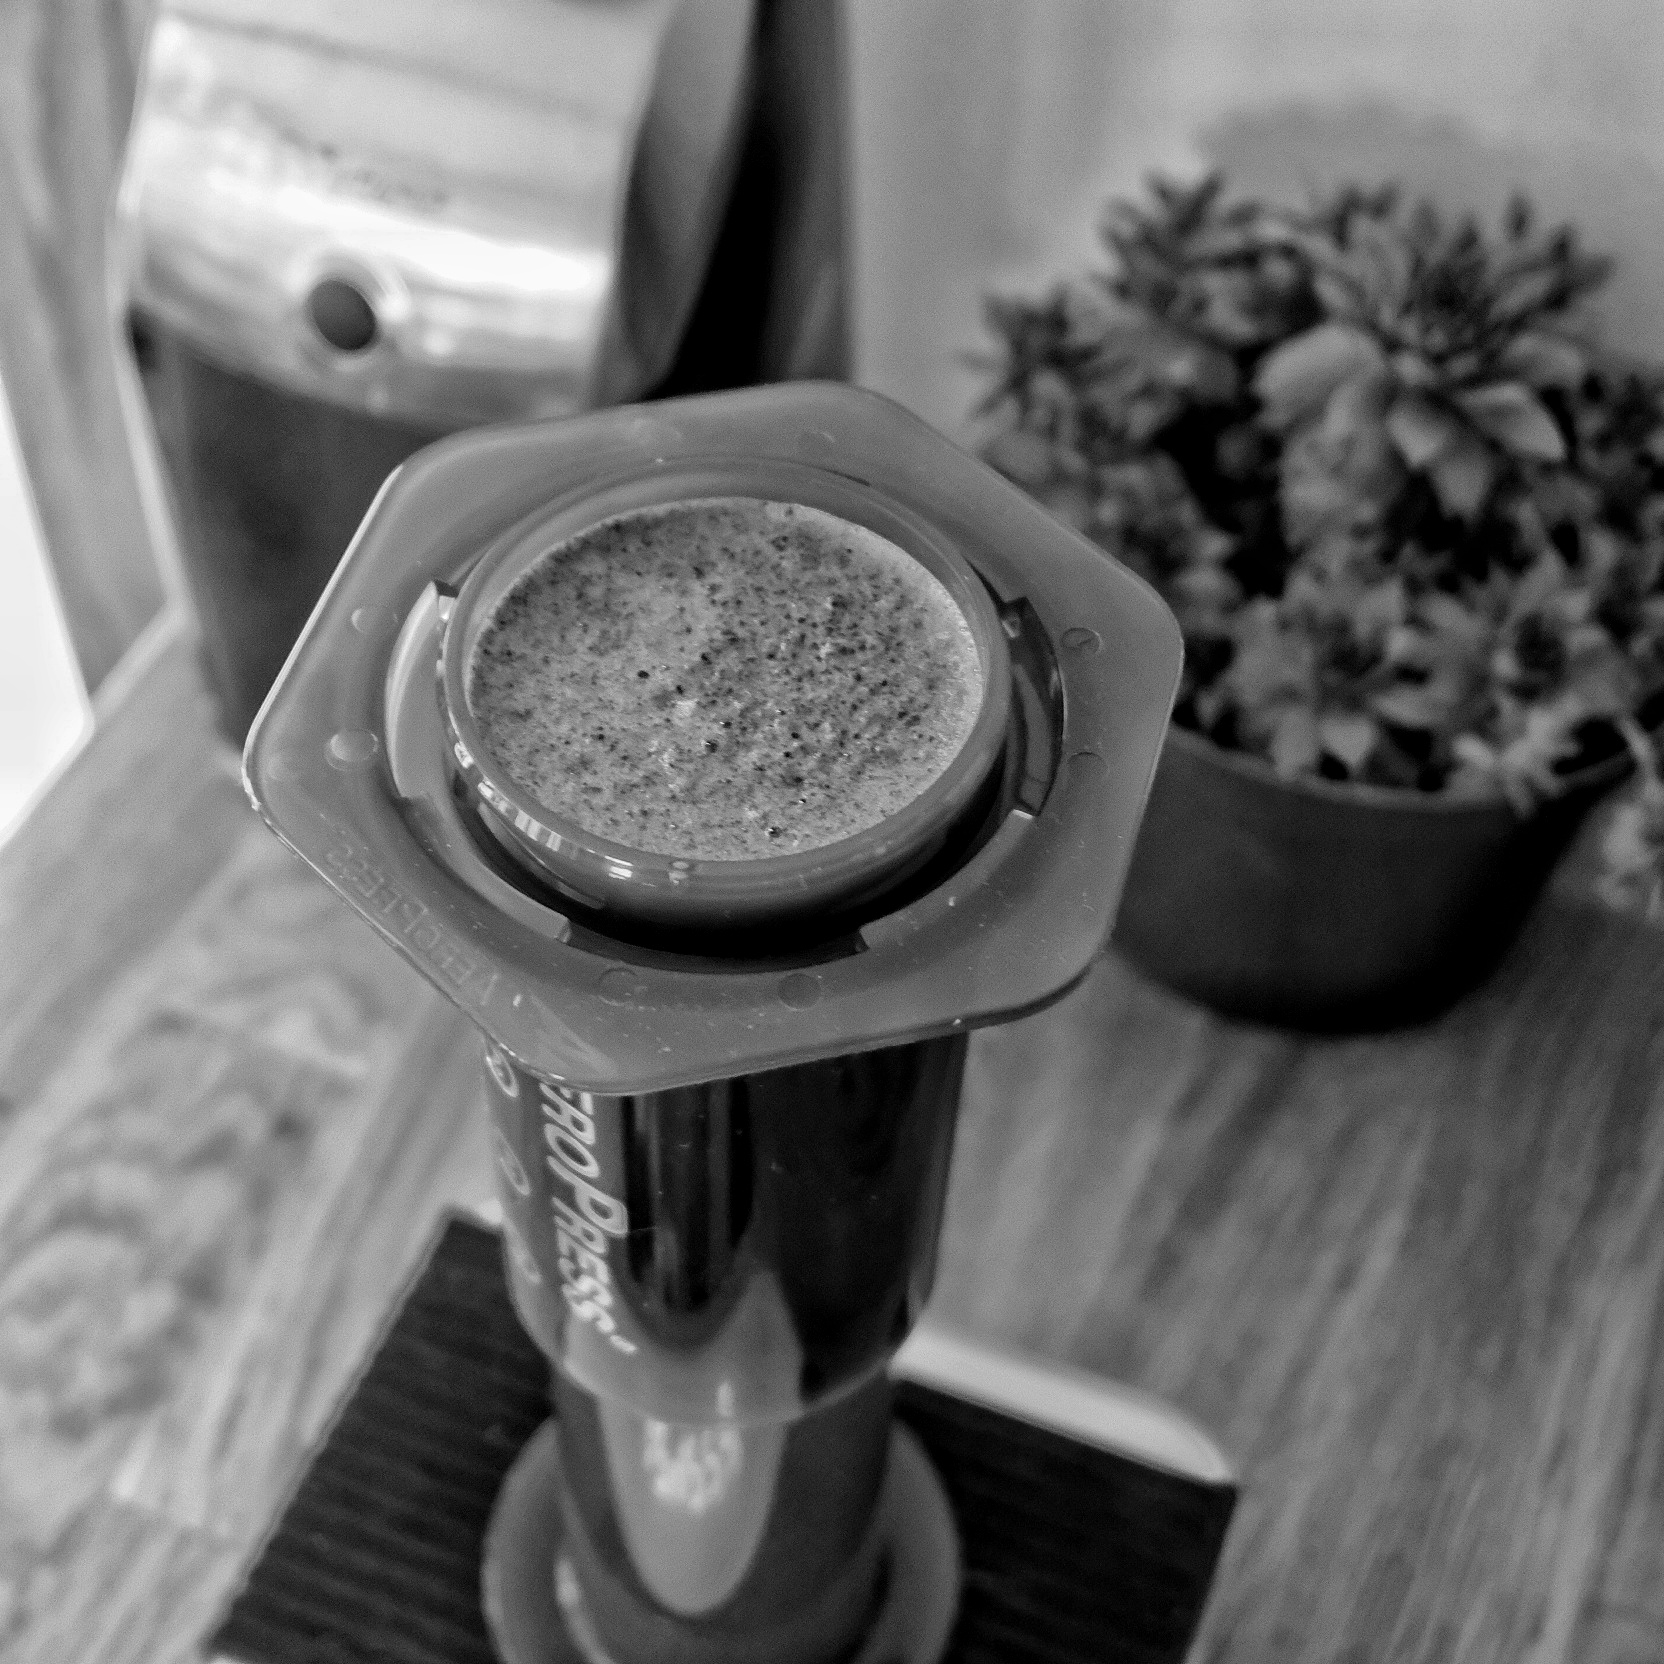 An Aeropress coffee maker brewing on top of a scale, seen from above